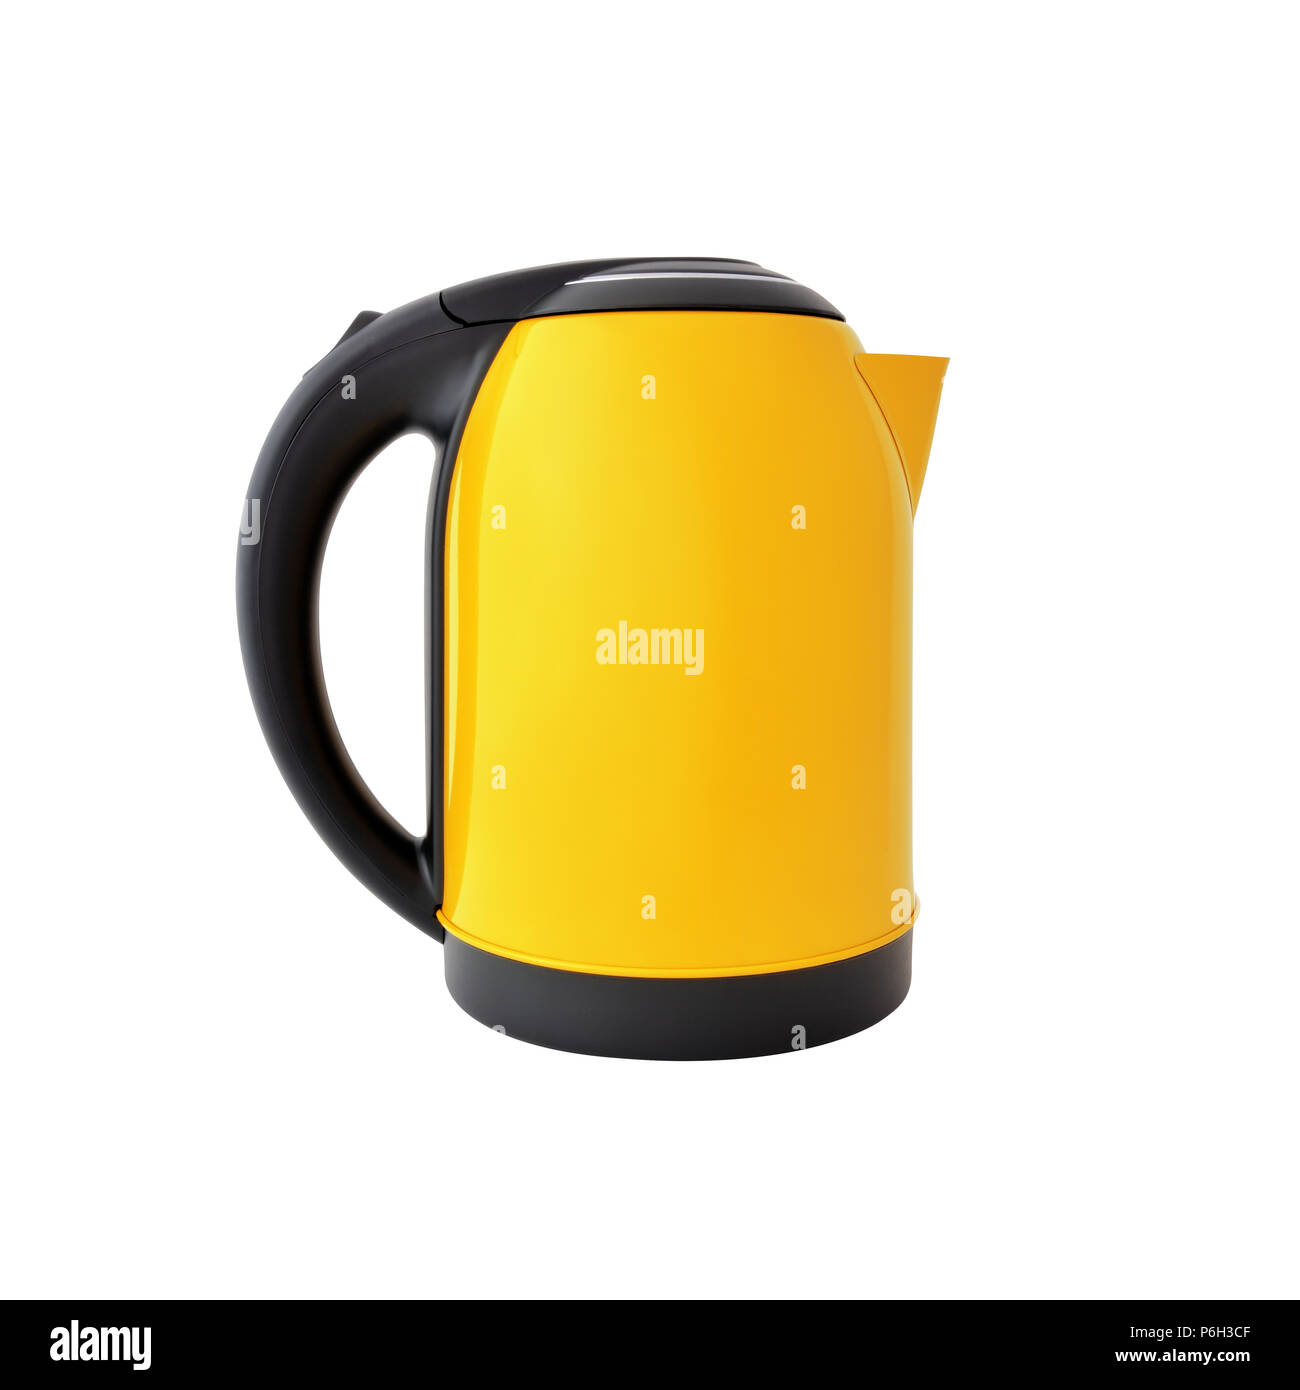 https://c8.alamy.com/comp/P6H3CF/yellow-kettle-isolated-on-white-background-with-clipping-path-P6H3CF.jpg